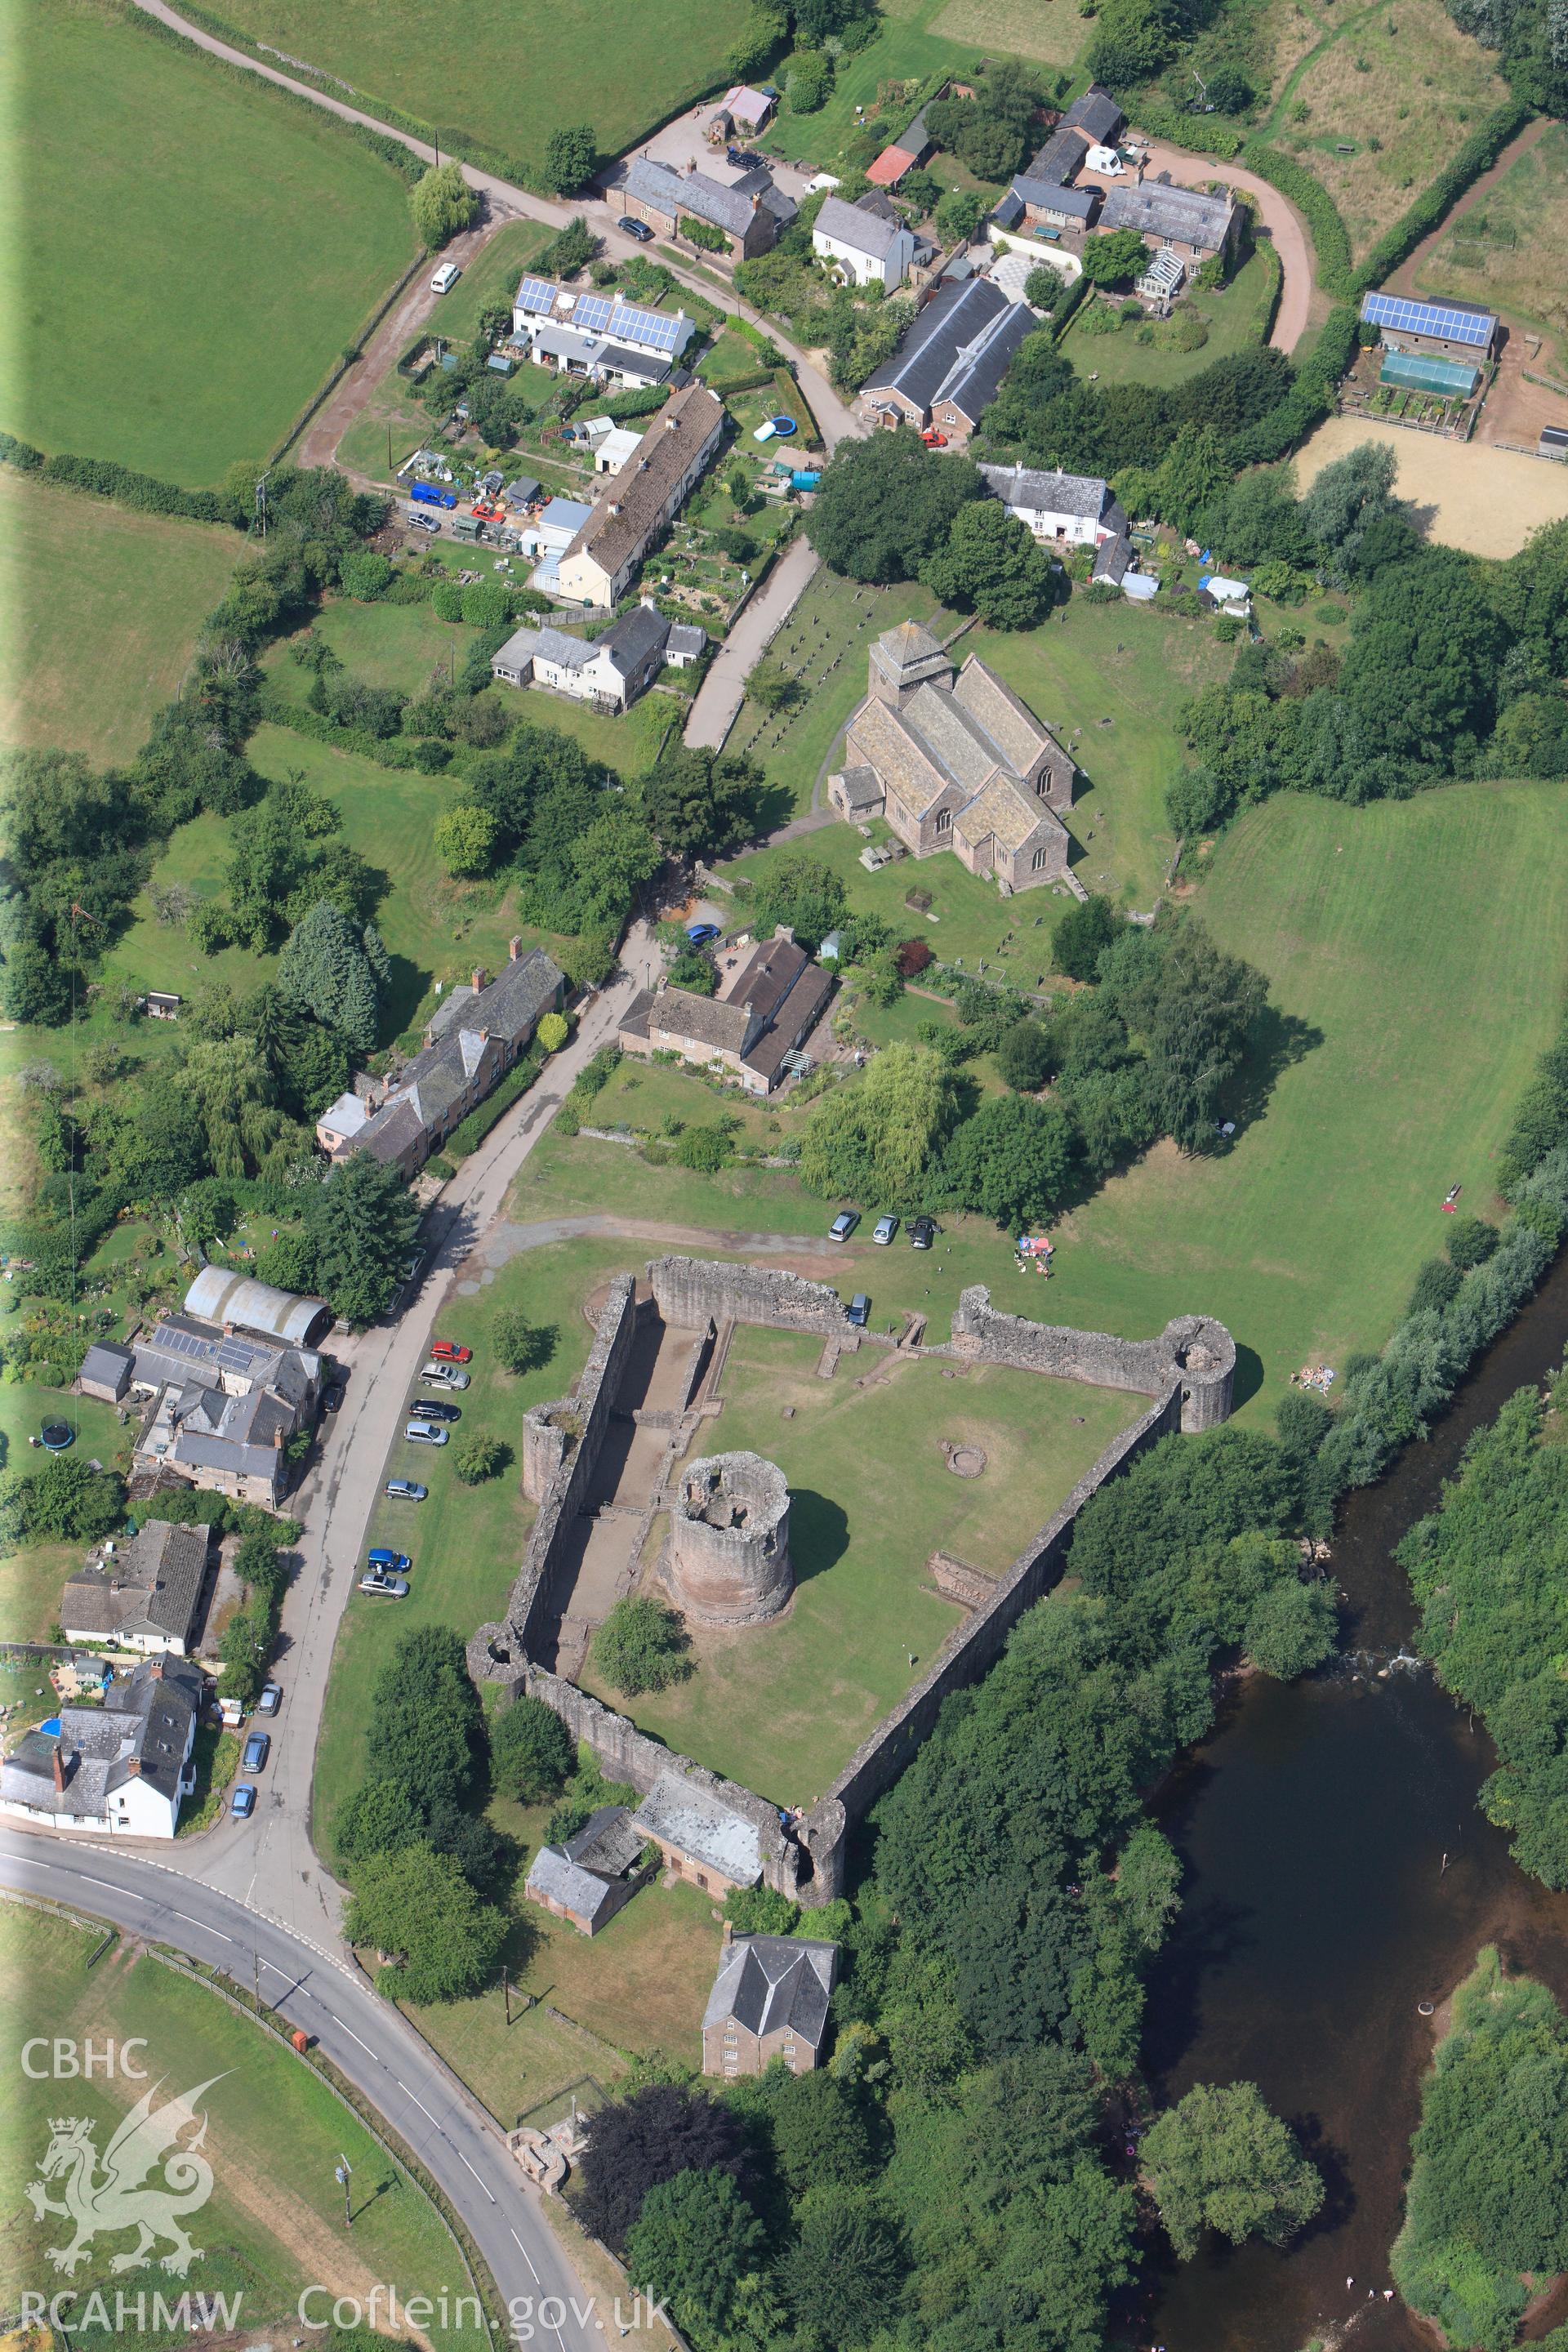 Skenfrith Castle, with Skenfrith corn mill immediately to the south east and St. Bridget's Church to the north west, Skenfrith, Monmouth. Oblique aerial photograph taken during Royal Commission?s programme of archaeological aerial reconnaissance by Toby Driver on 1st August 2013.